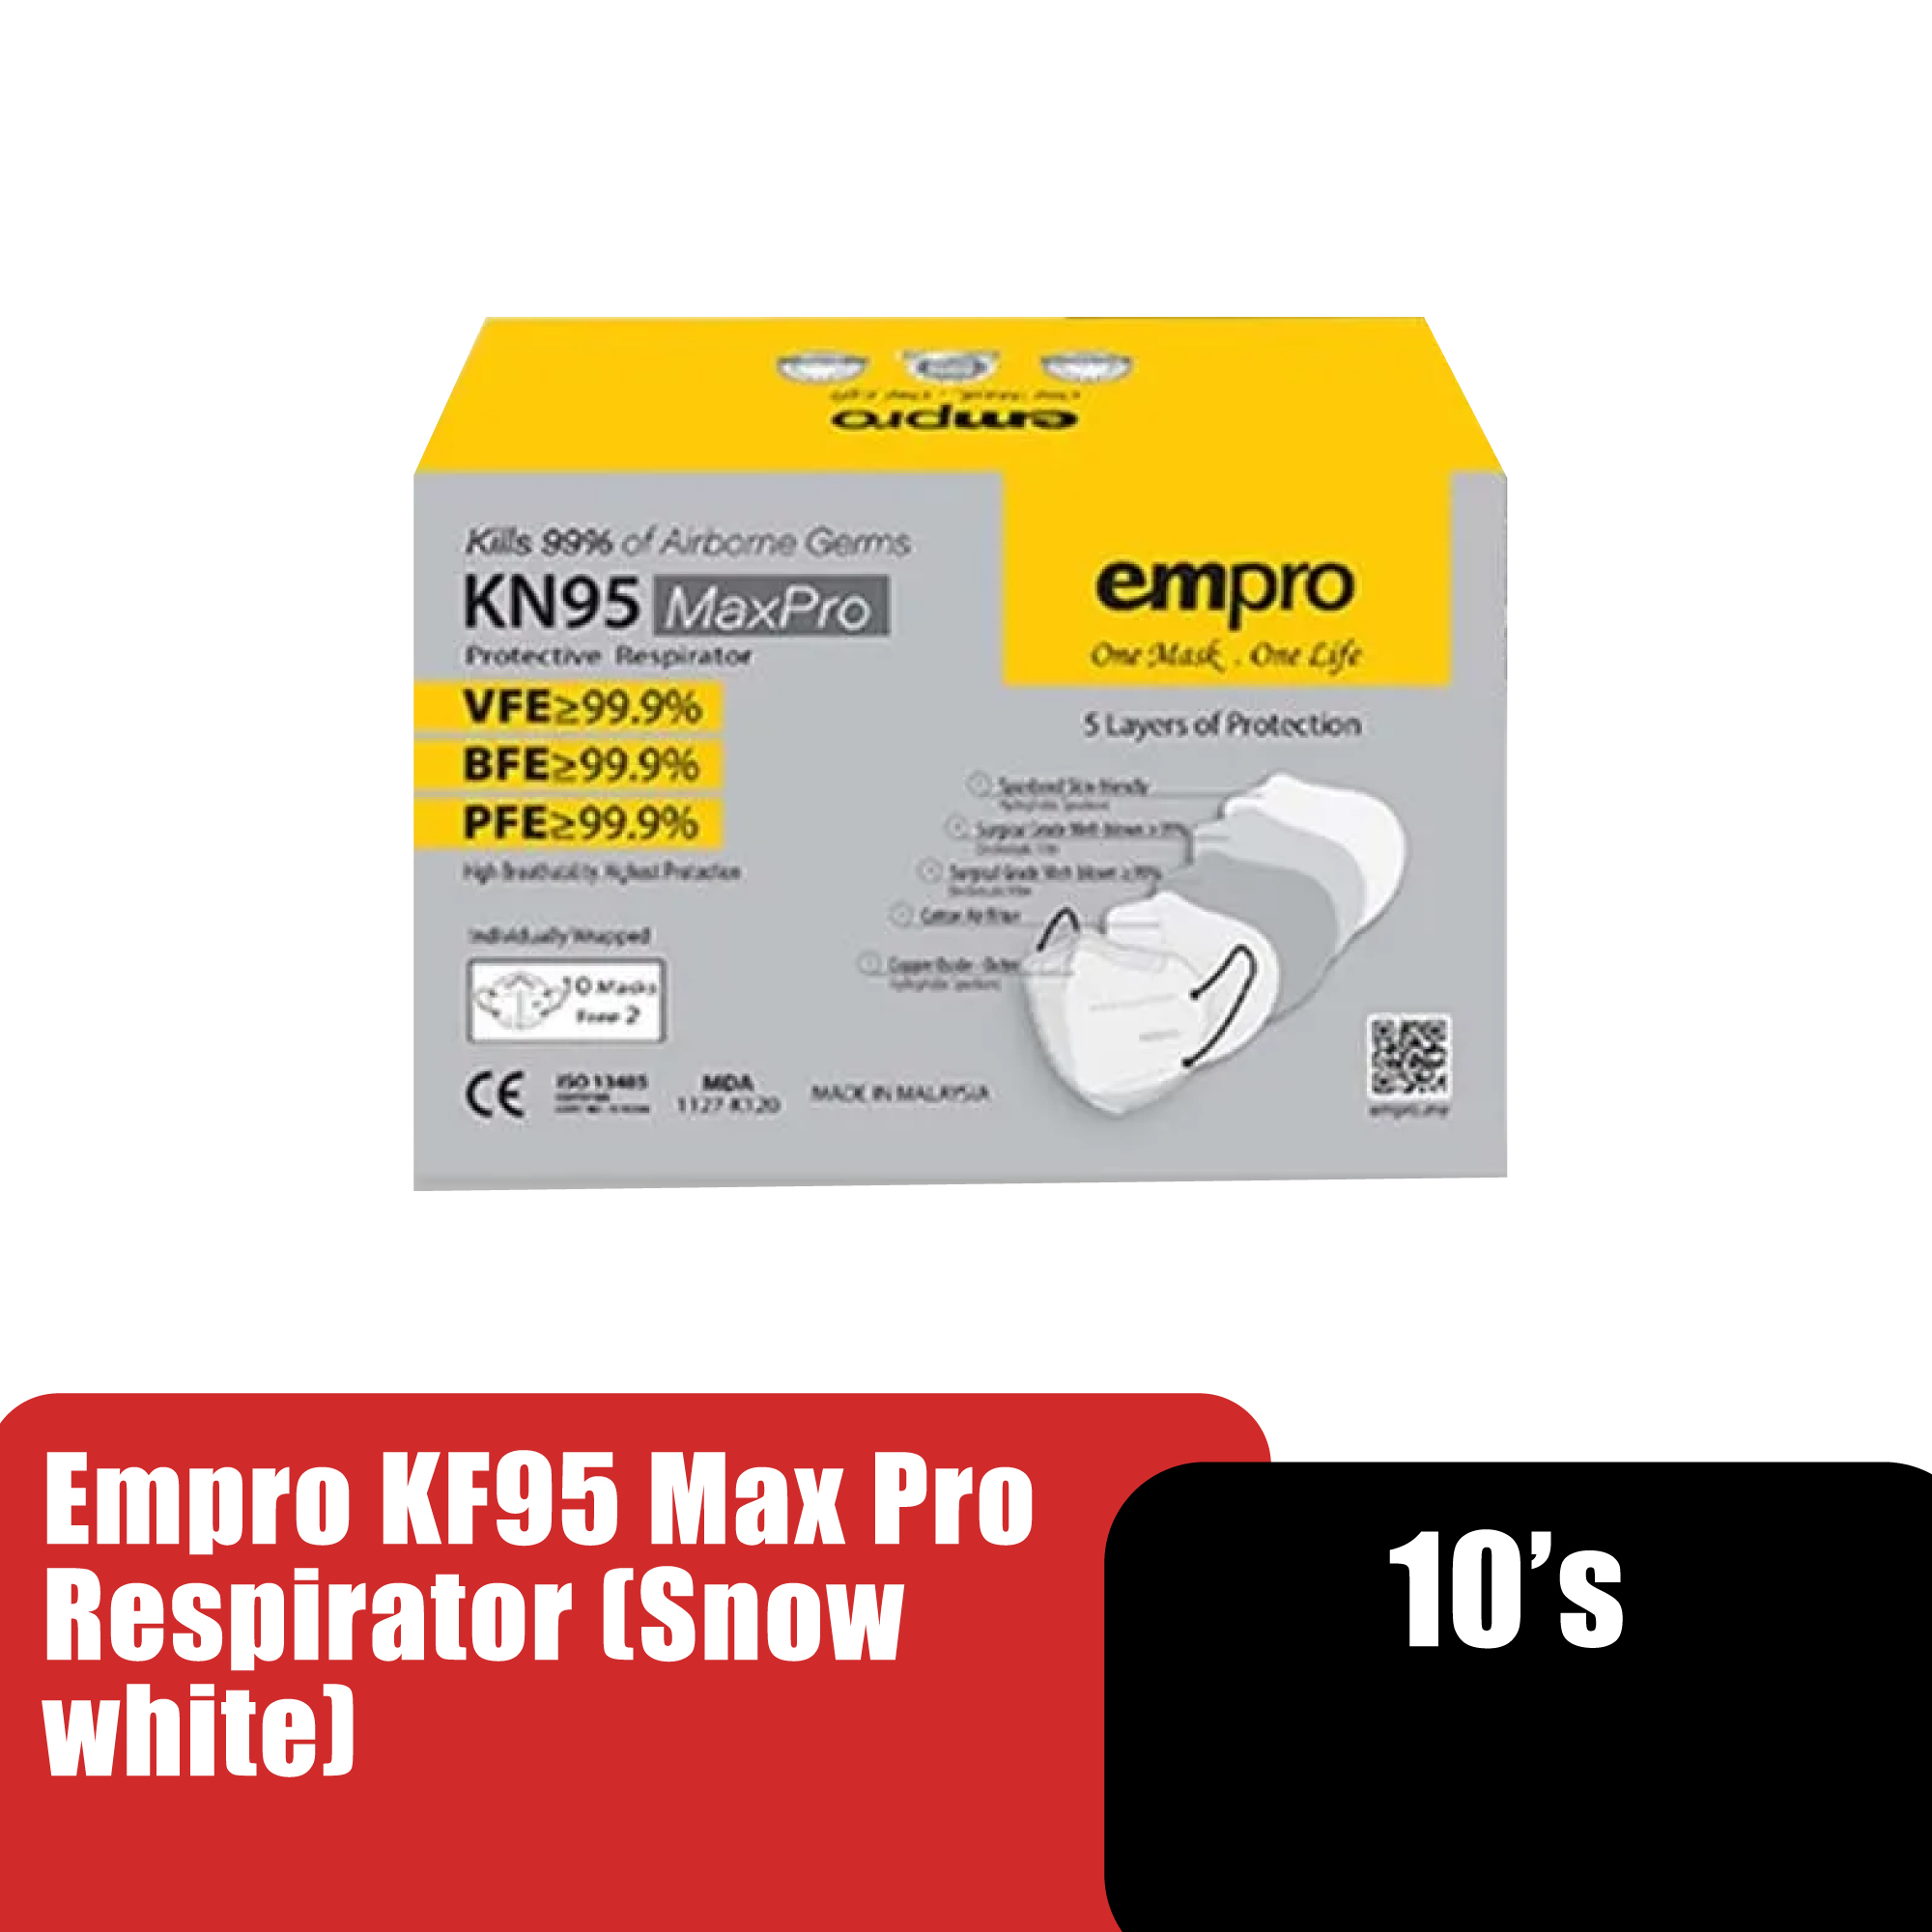 Empro Mask KF95 Pro Respirator Empro Copper Oxide Mask Antimicrobial Face Mask 10's - Snow White